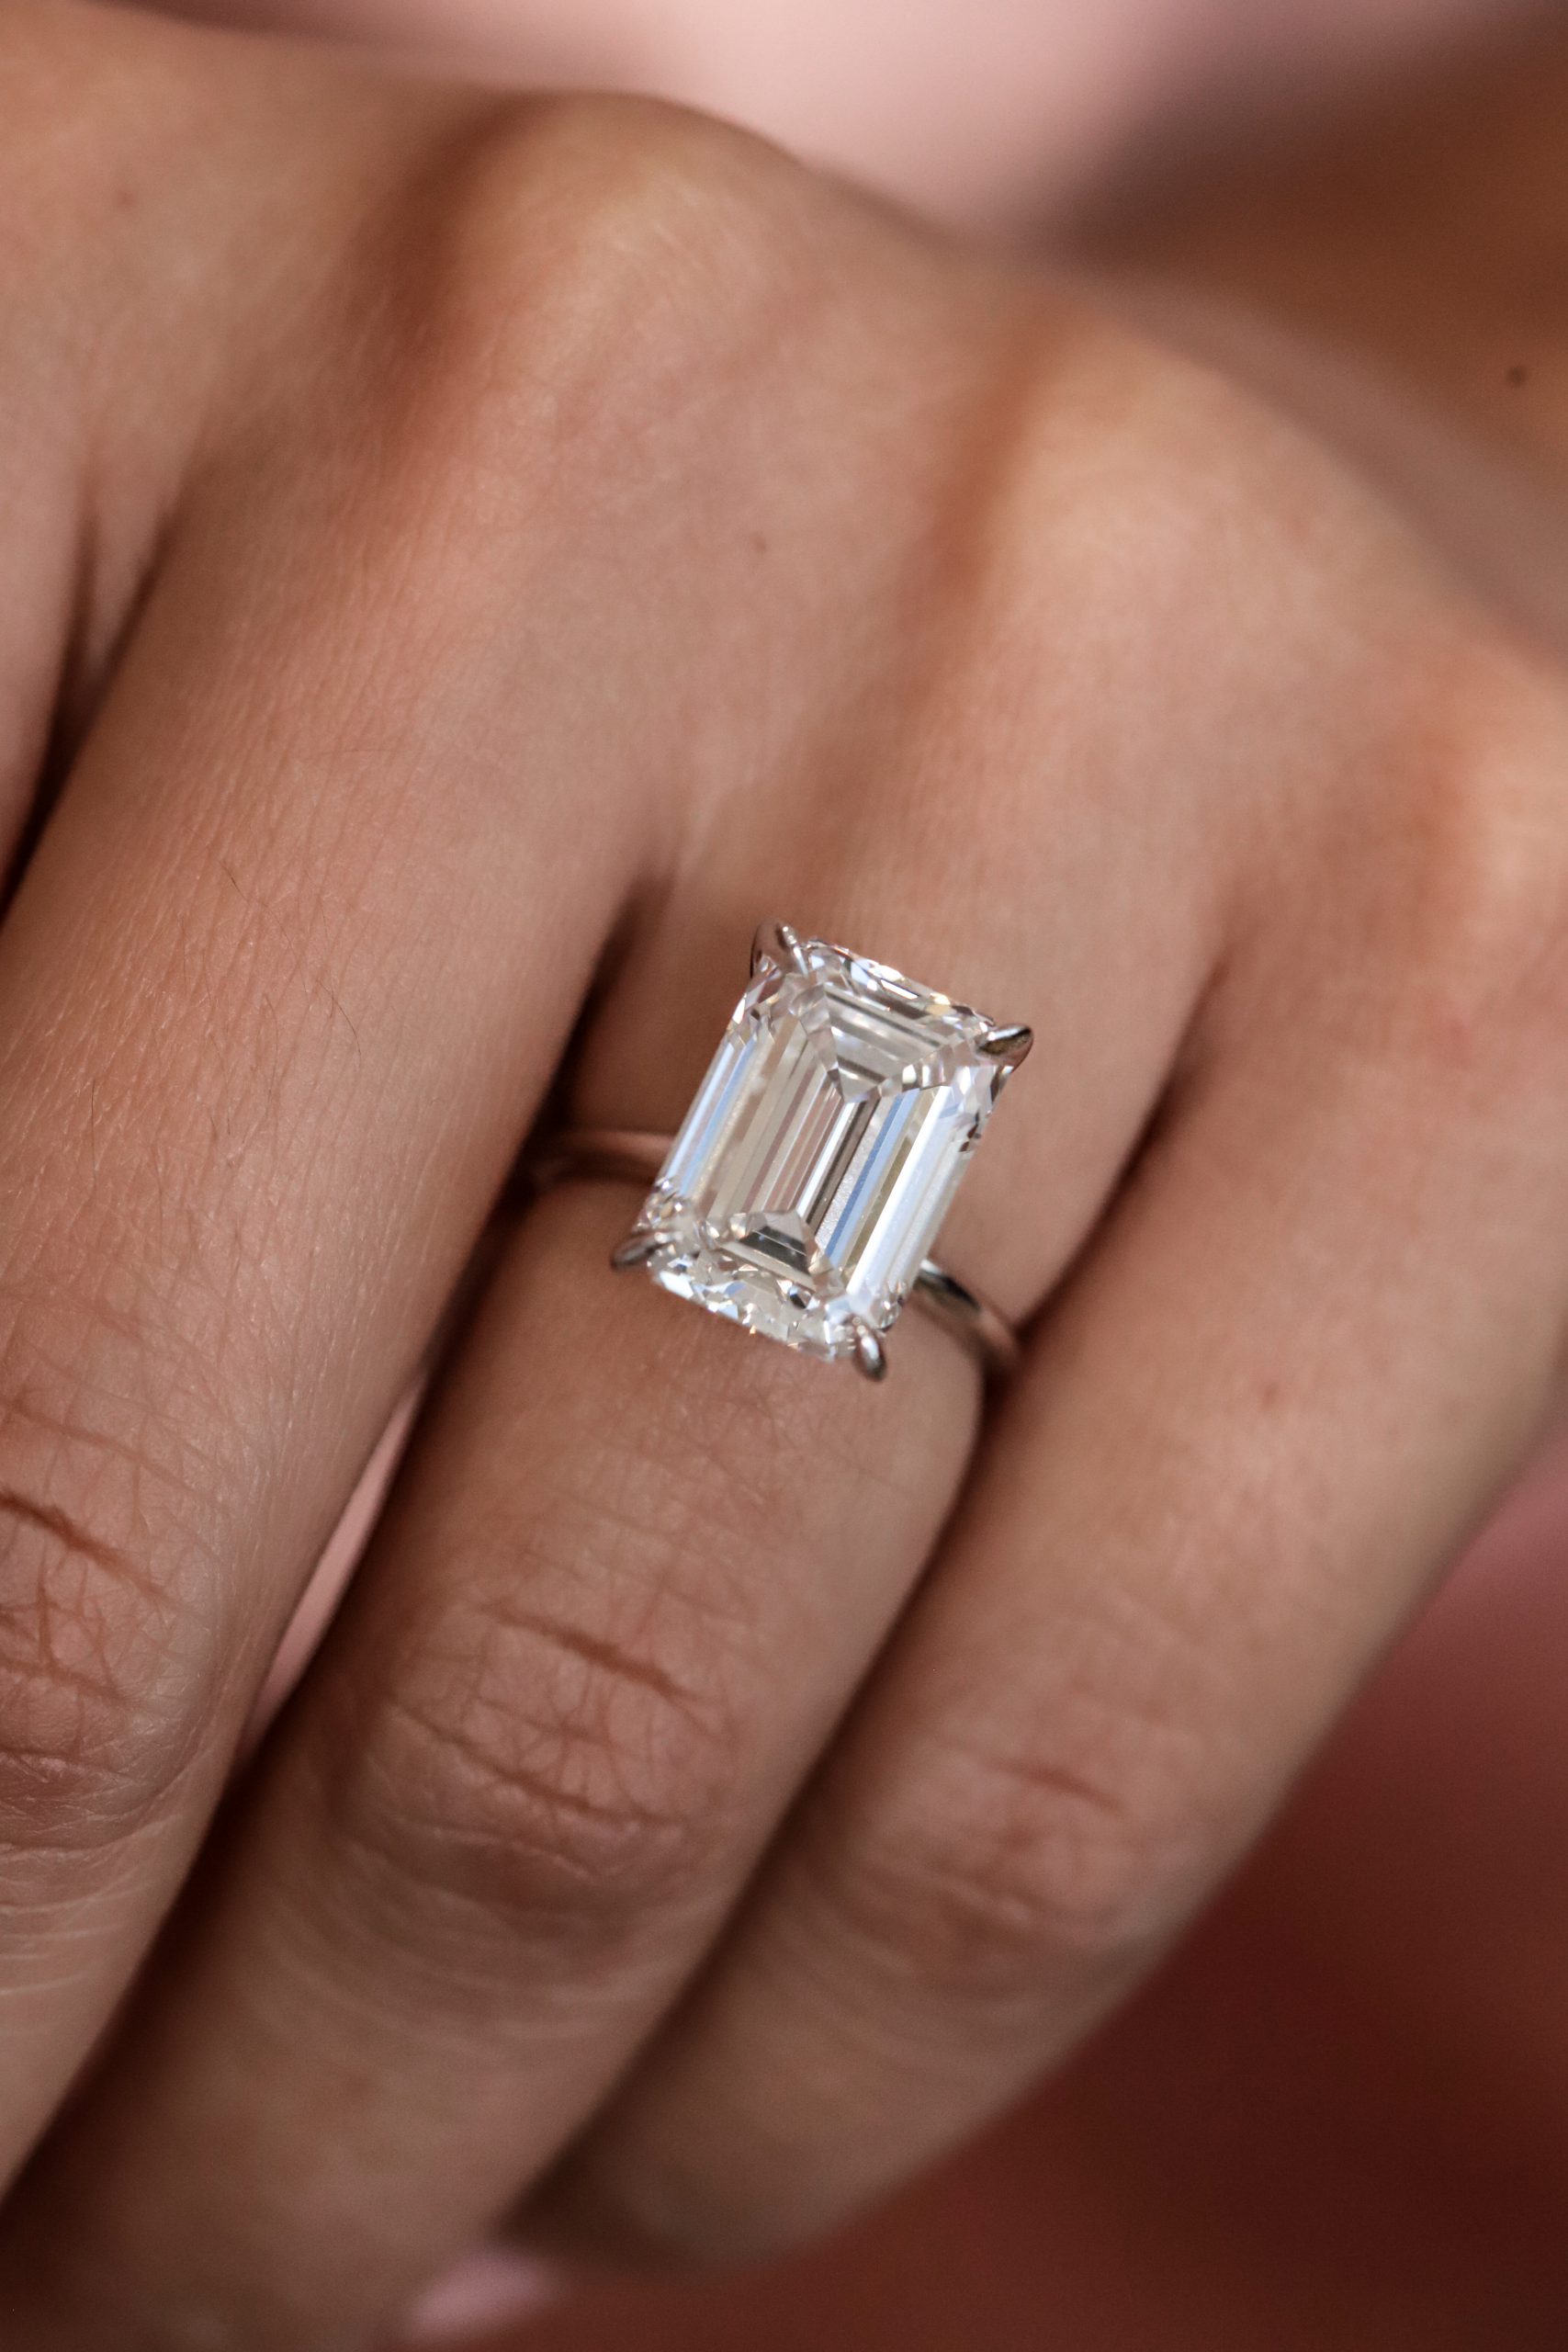 Sofia Richie Inspired Engagement Ring